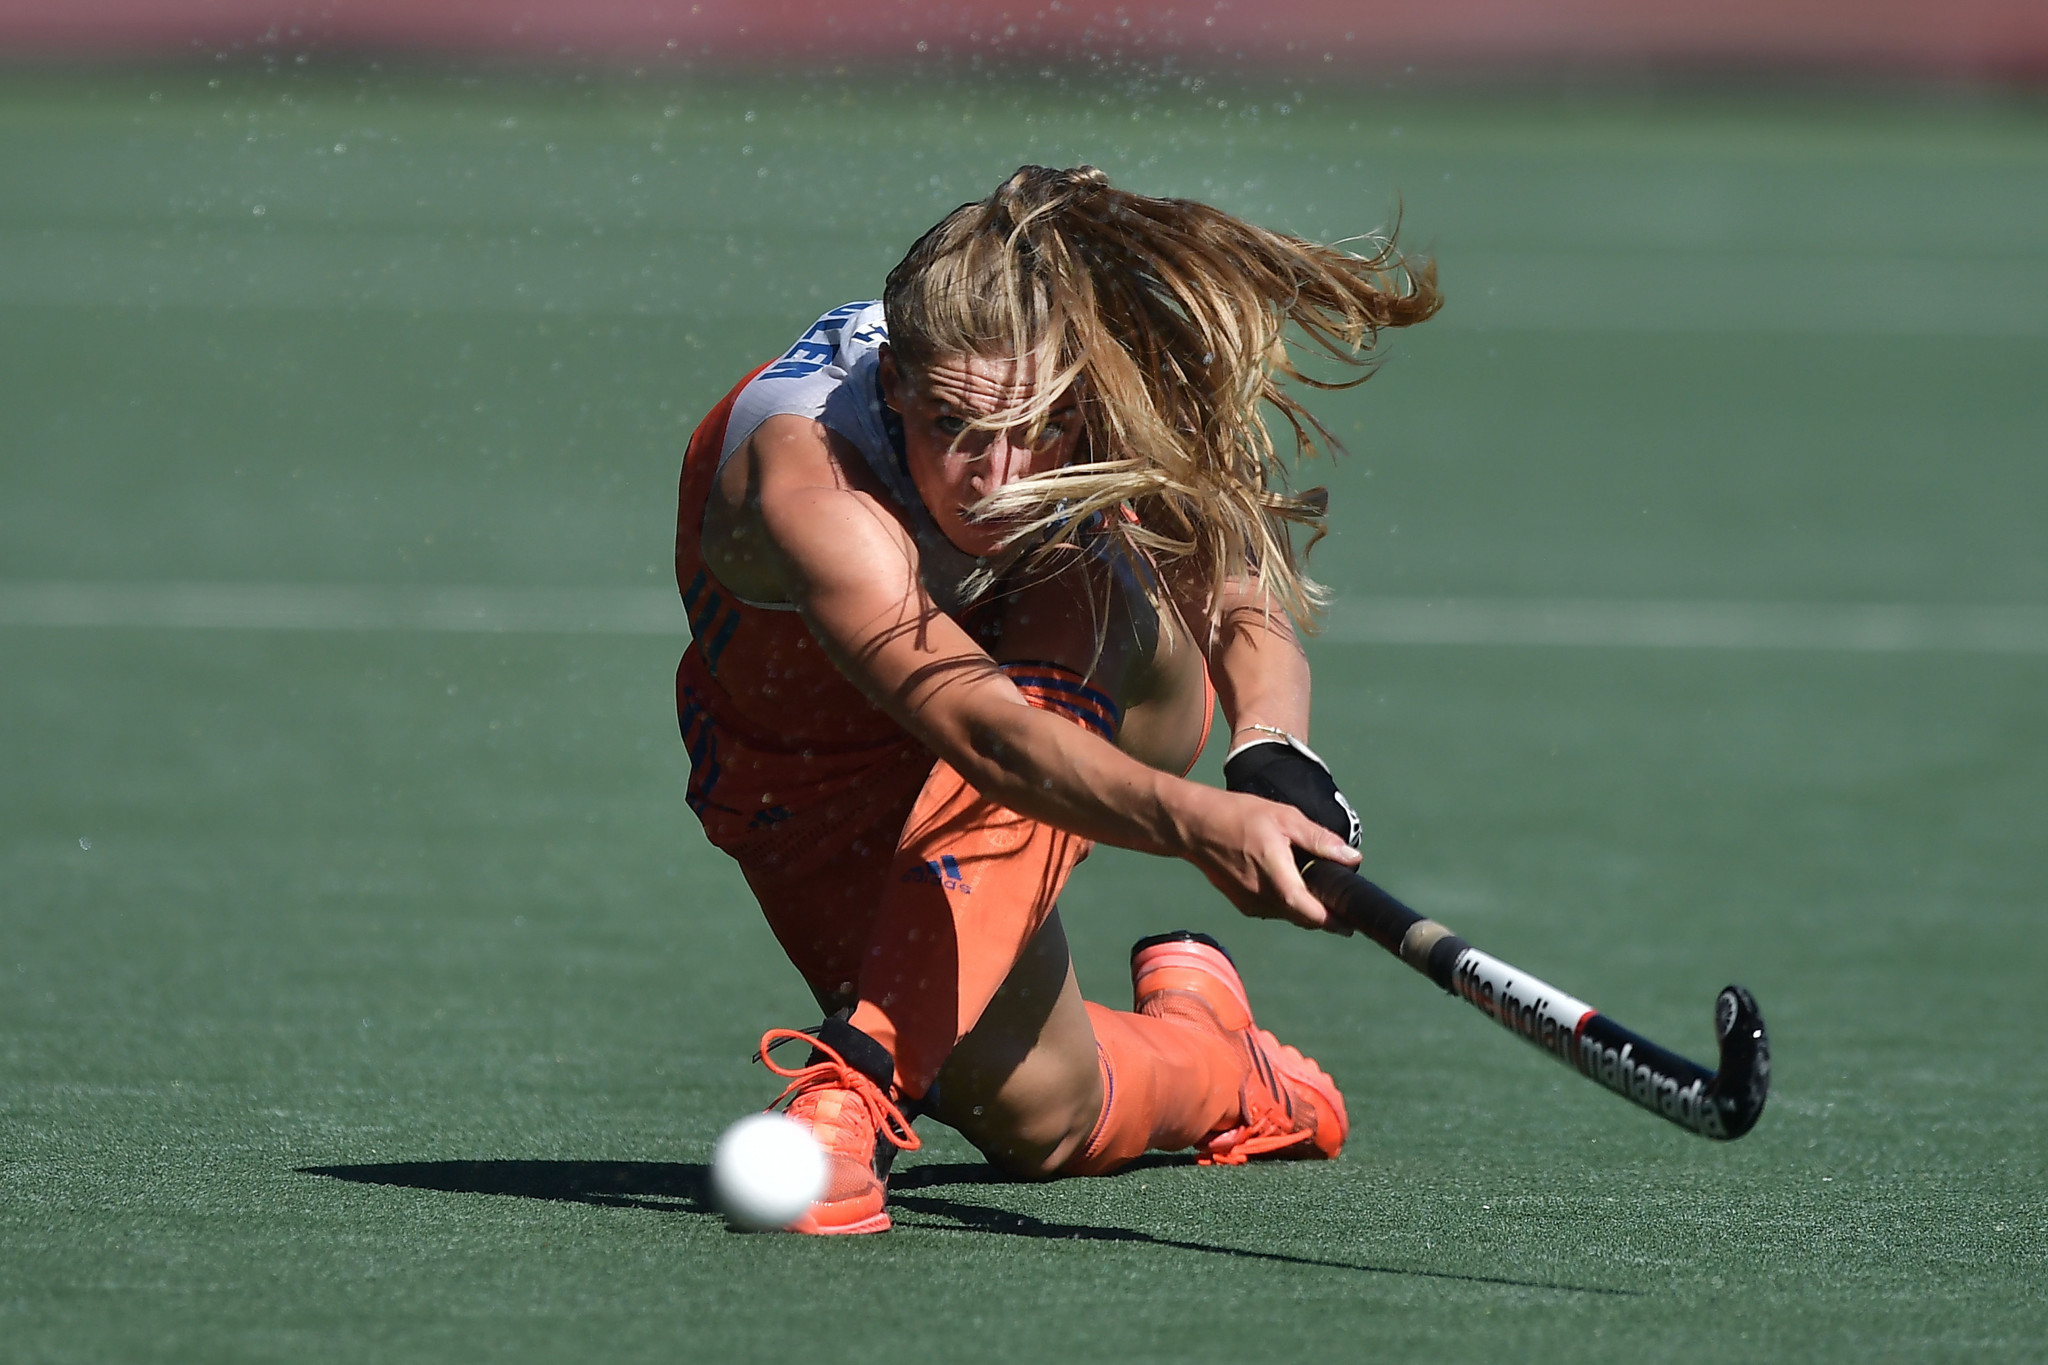 England dominate Spain in Hockey Pro League as The Netherlands also take victory